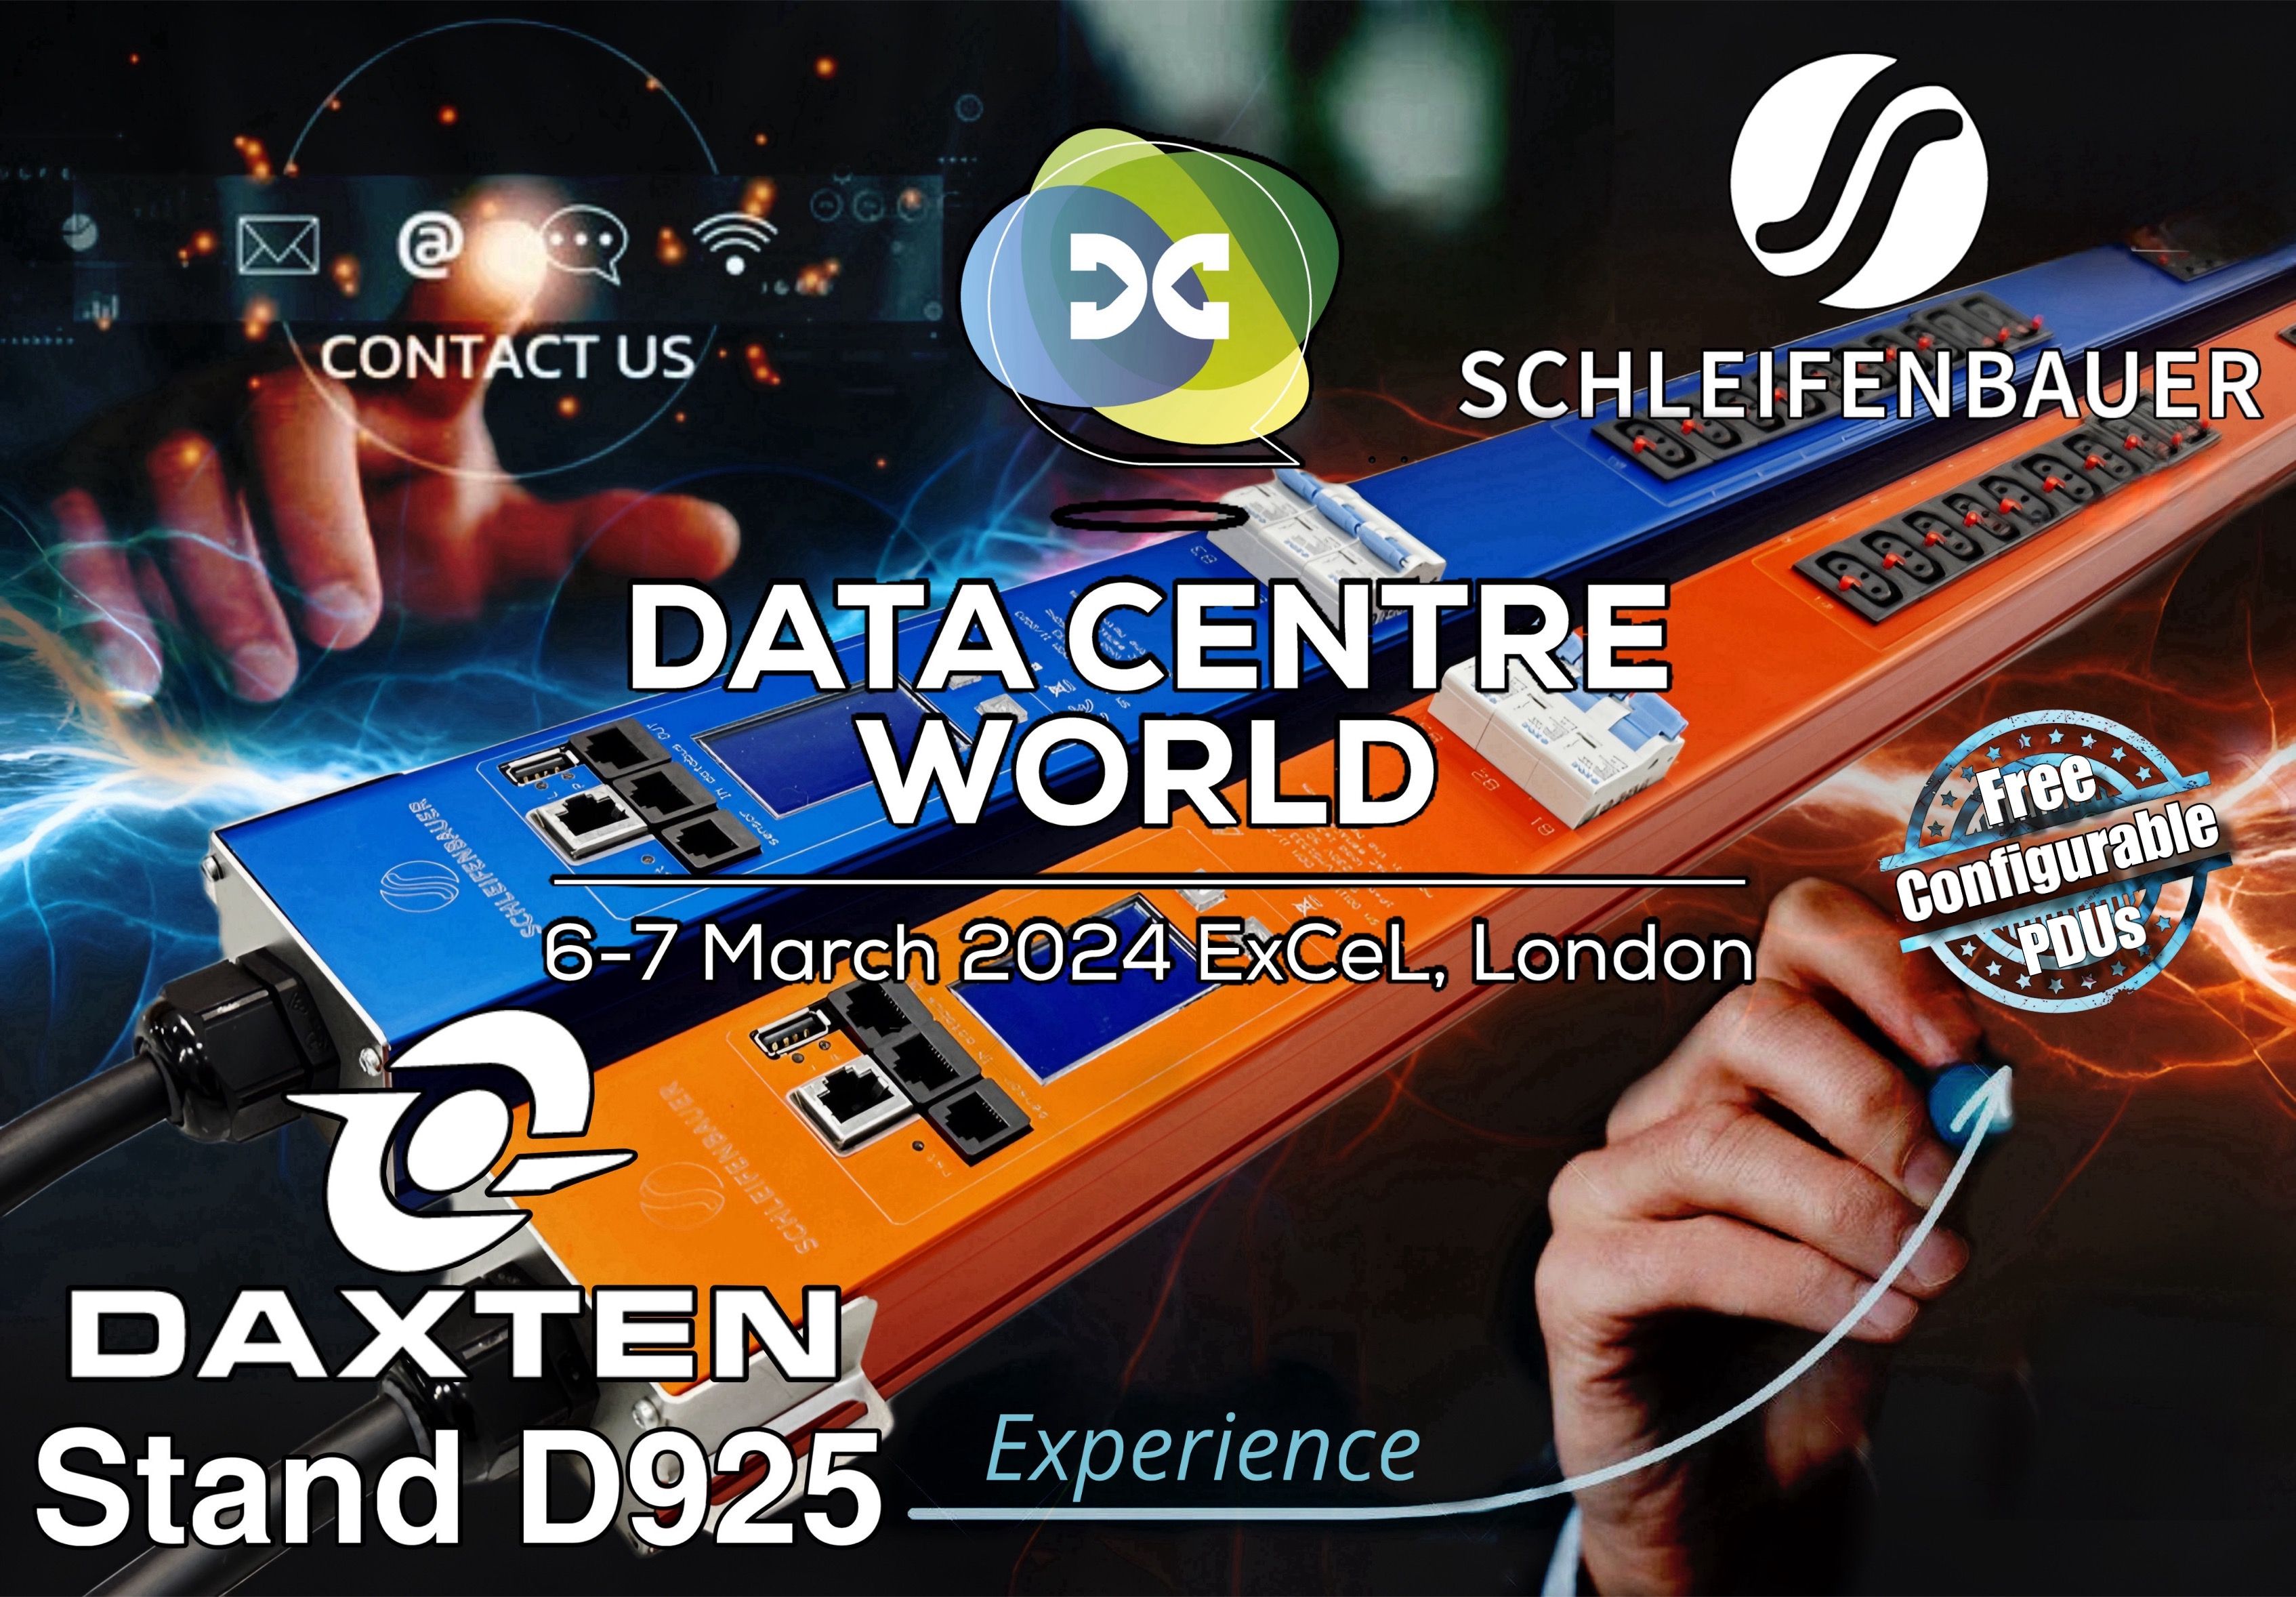 DAXTEN STAND D925: Experience the difference between an “OK” and “Perfect” in-rack PDU that can be configured exactly to individual requirements